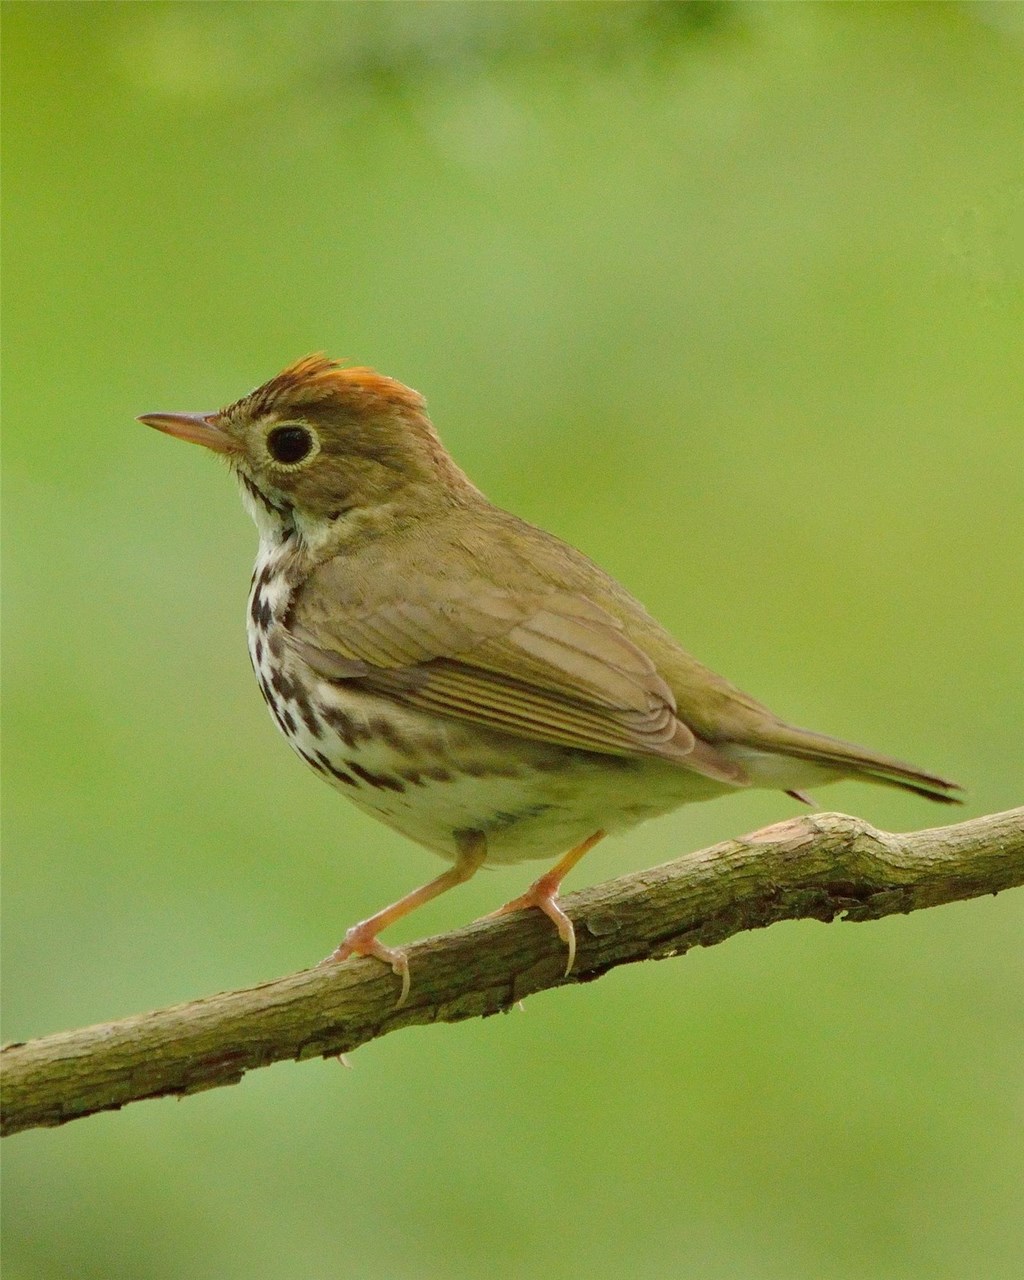 Ovenbird perched upon a branch